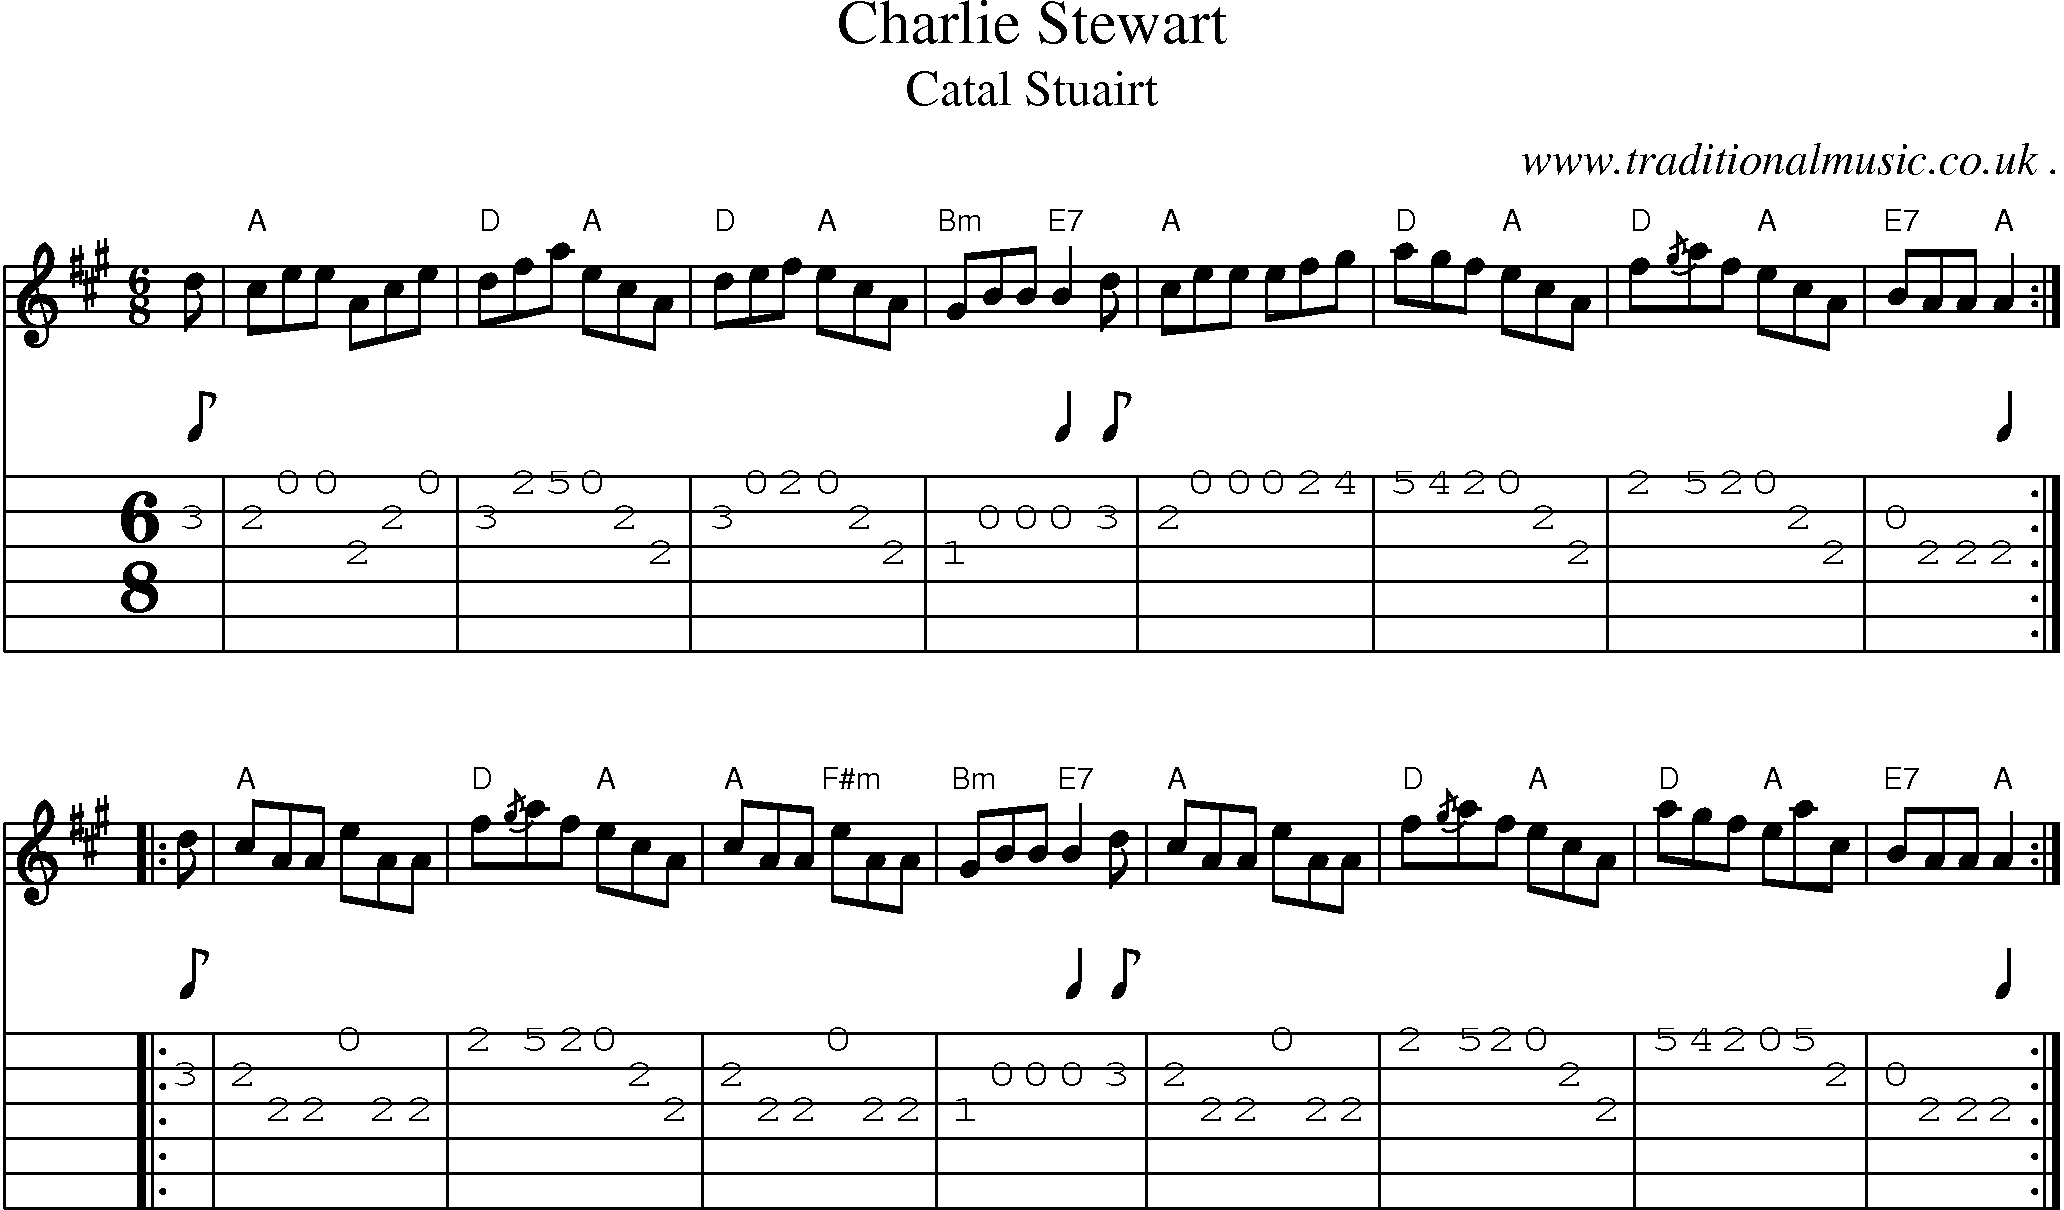 Sheet-music  score, Chords and Guitar Tabs for Charlie Stewart